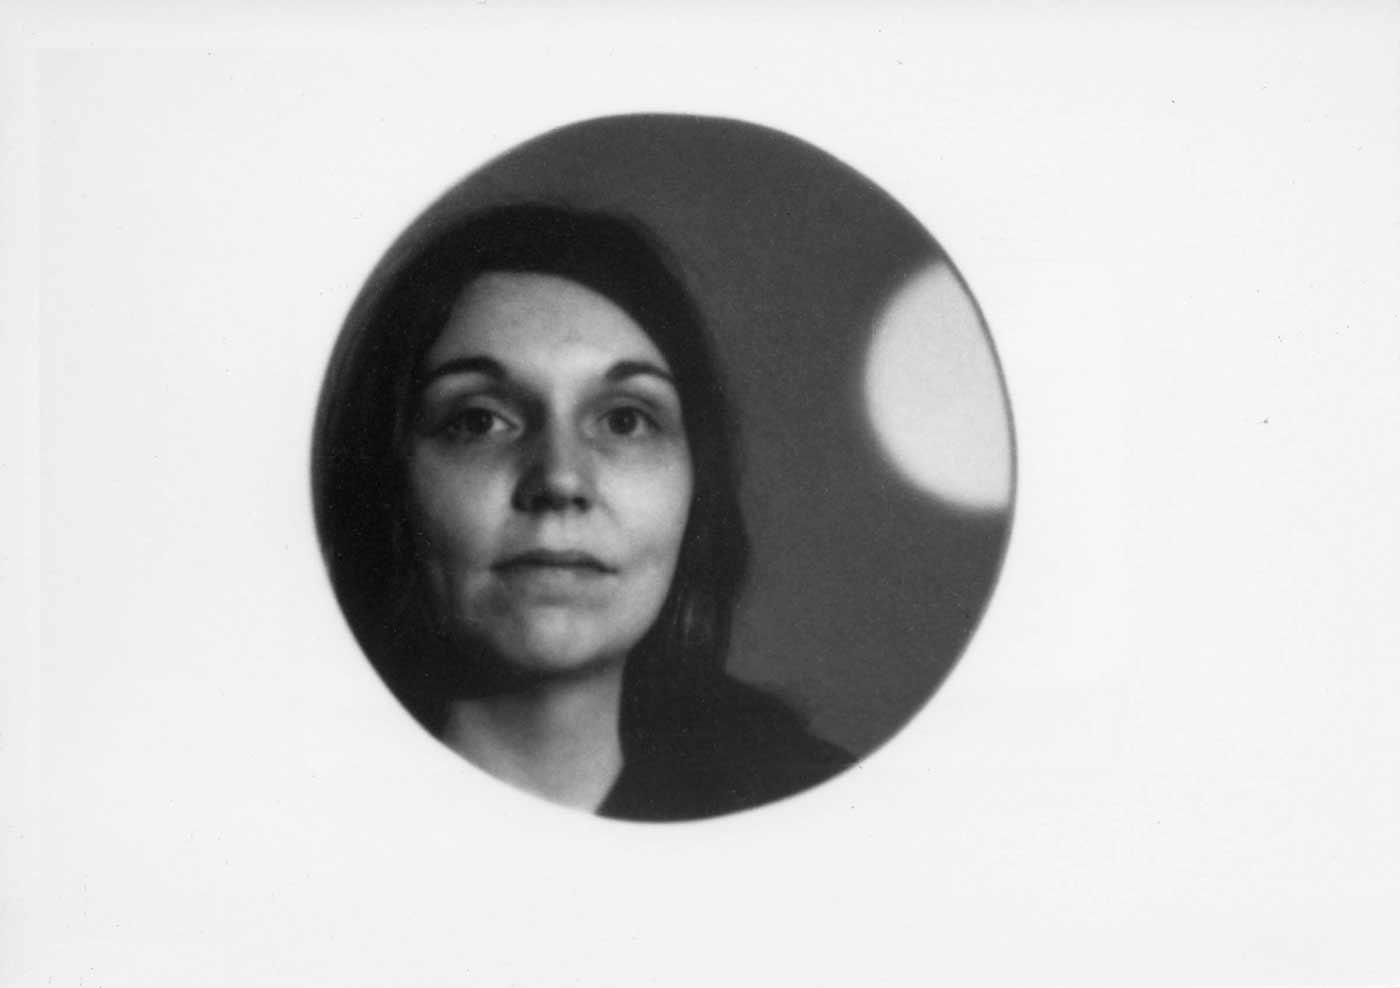 Nancy Holt framed by a circular hole in her installation Holes of Light, January 1973.